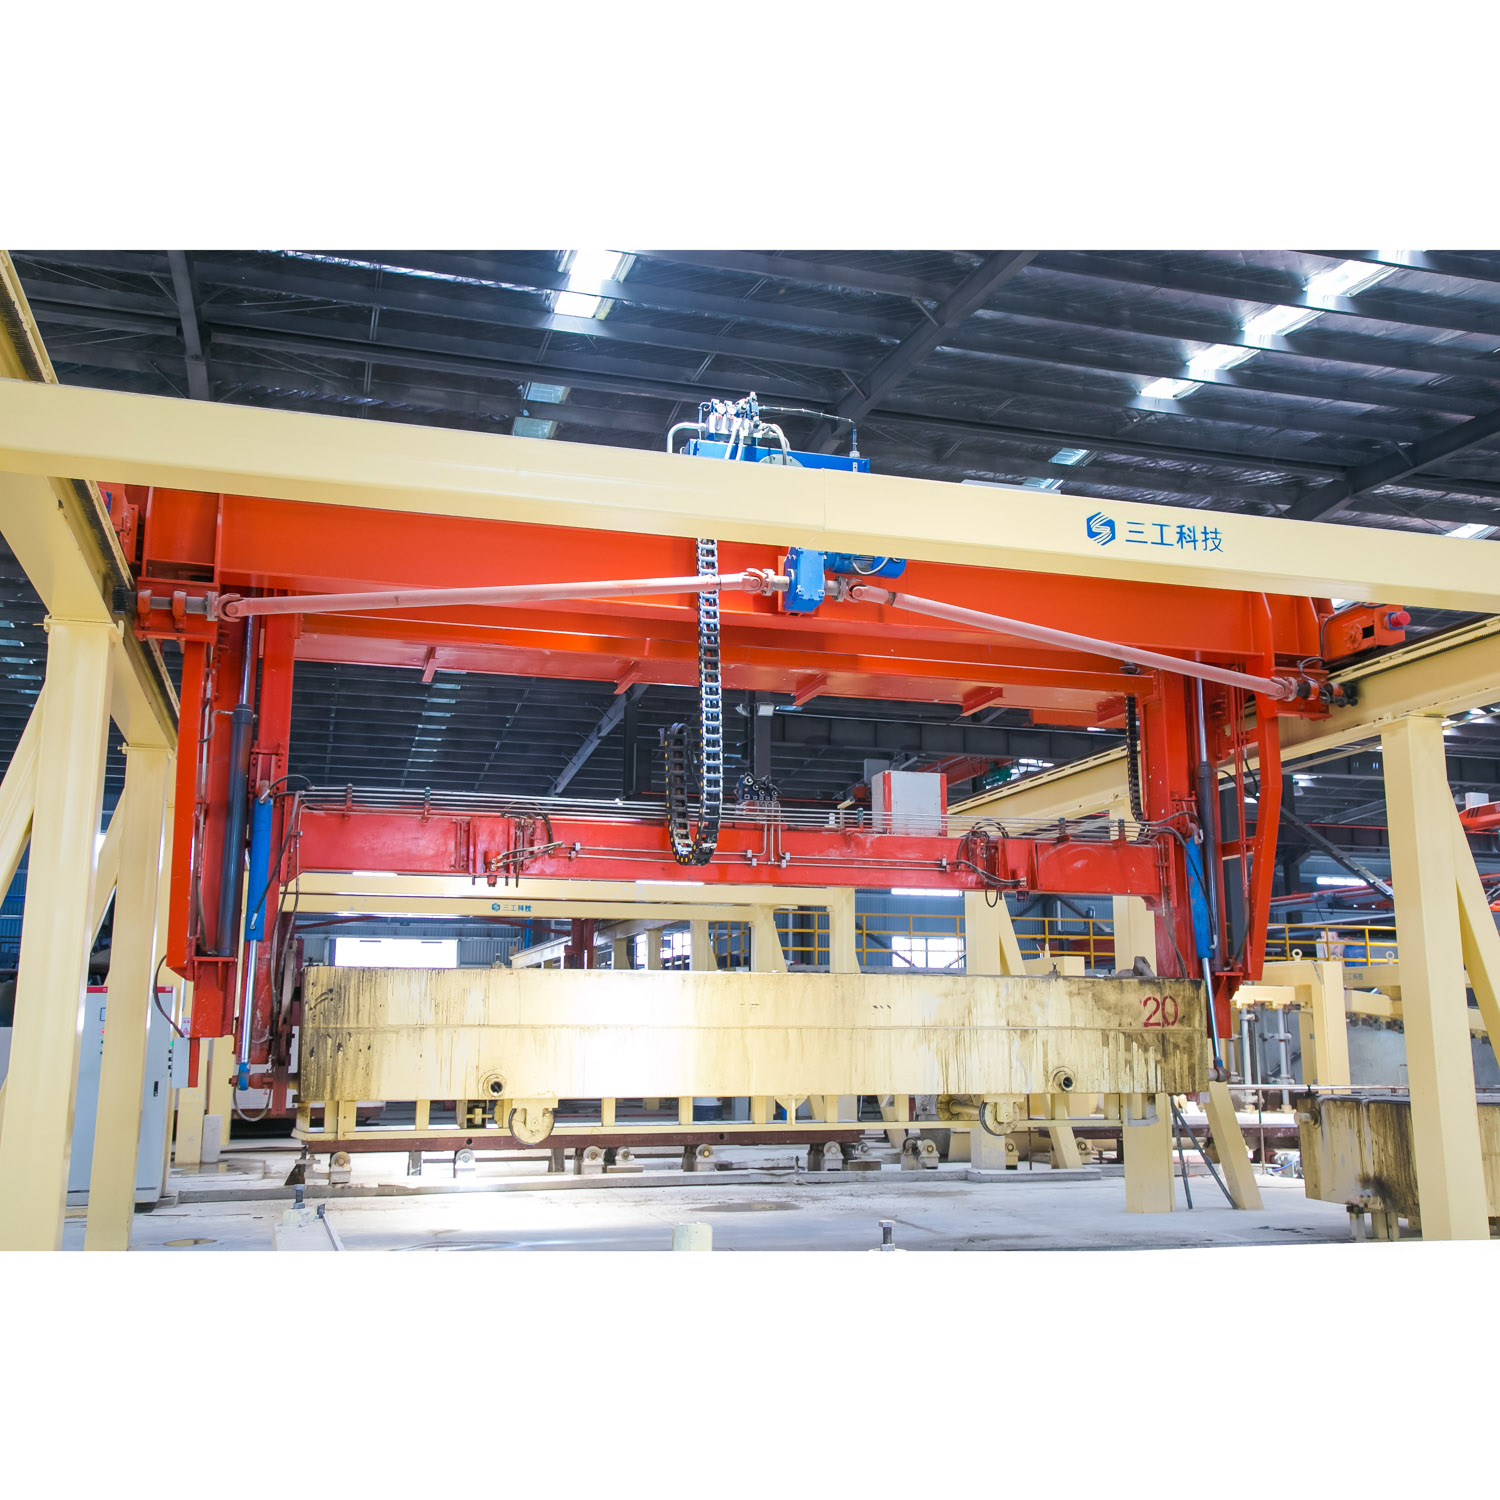 Aerated brick equipment production line construction can be selected in winter